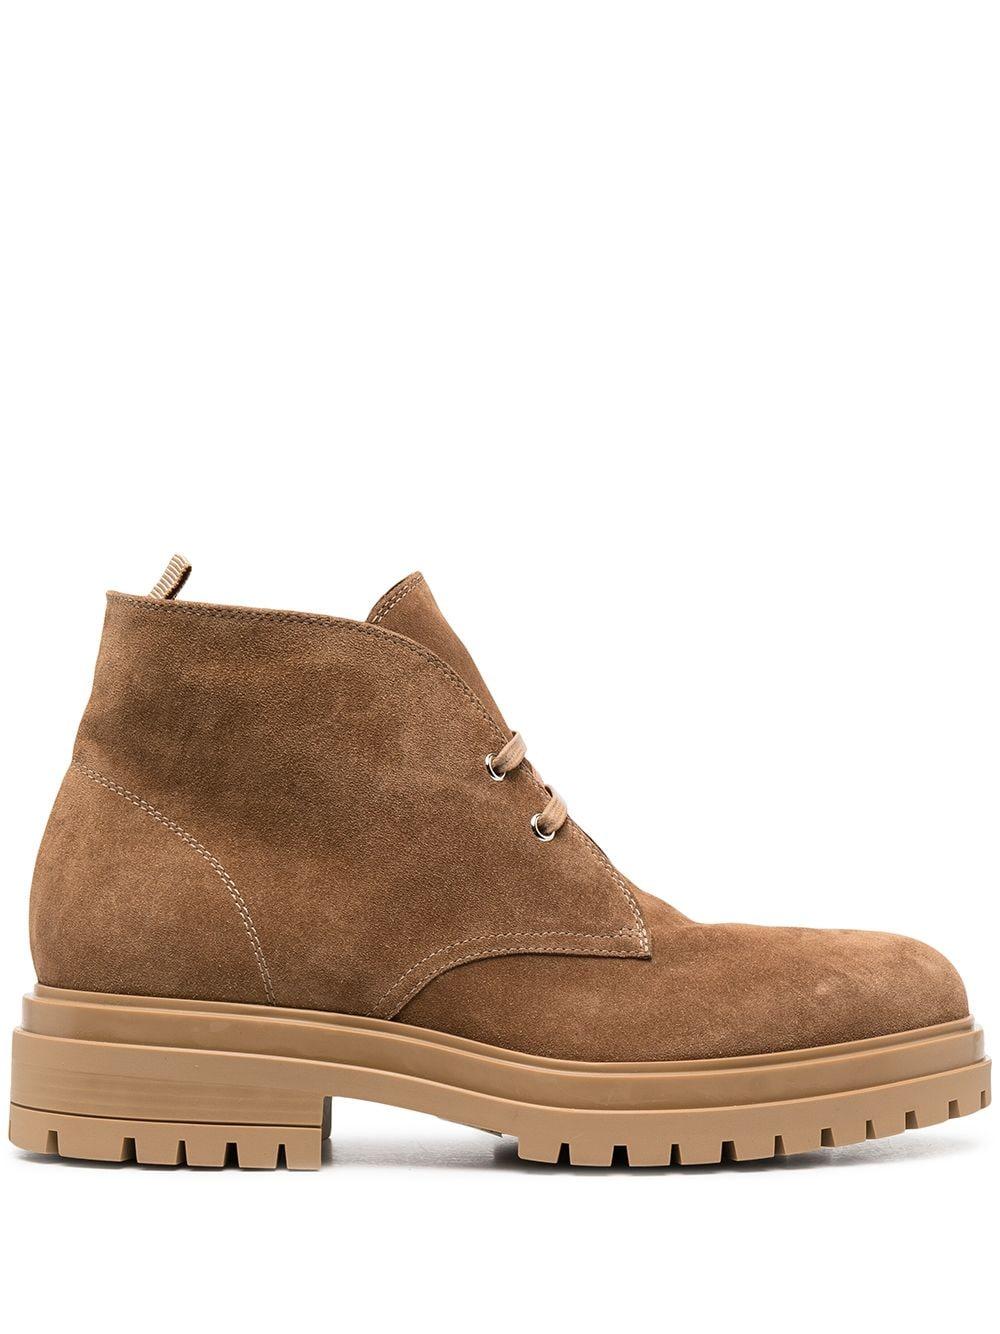 Gianvito Rossi Lace-up Suede Desert Boots in Brown for Men - Lyst